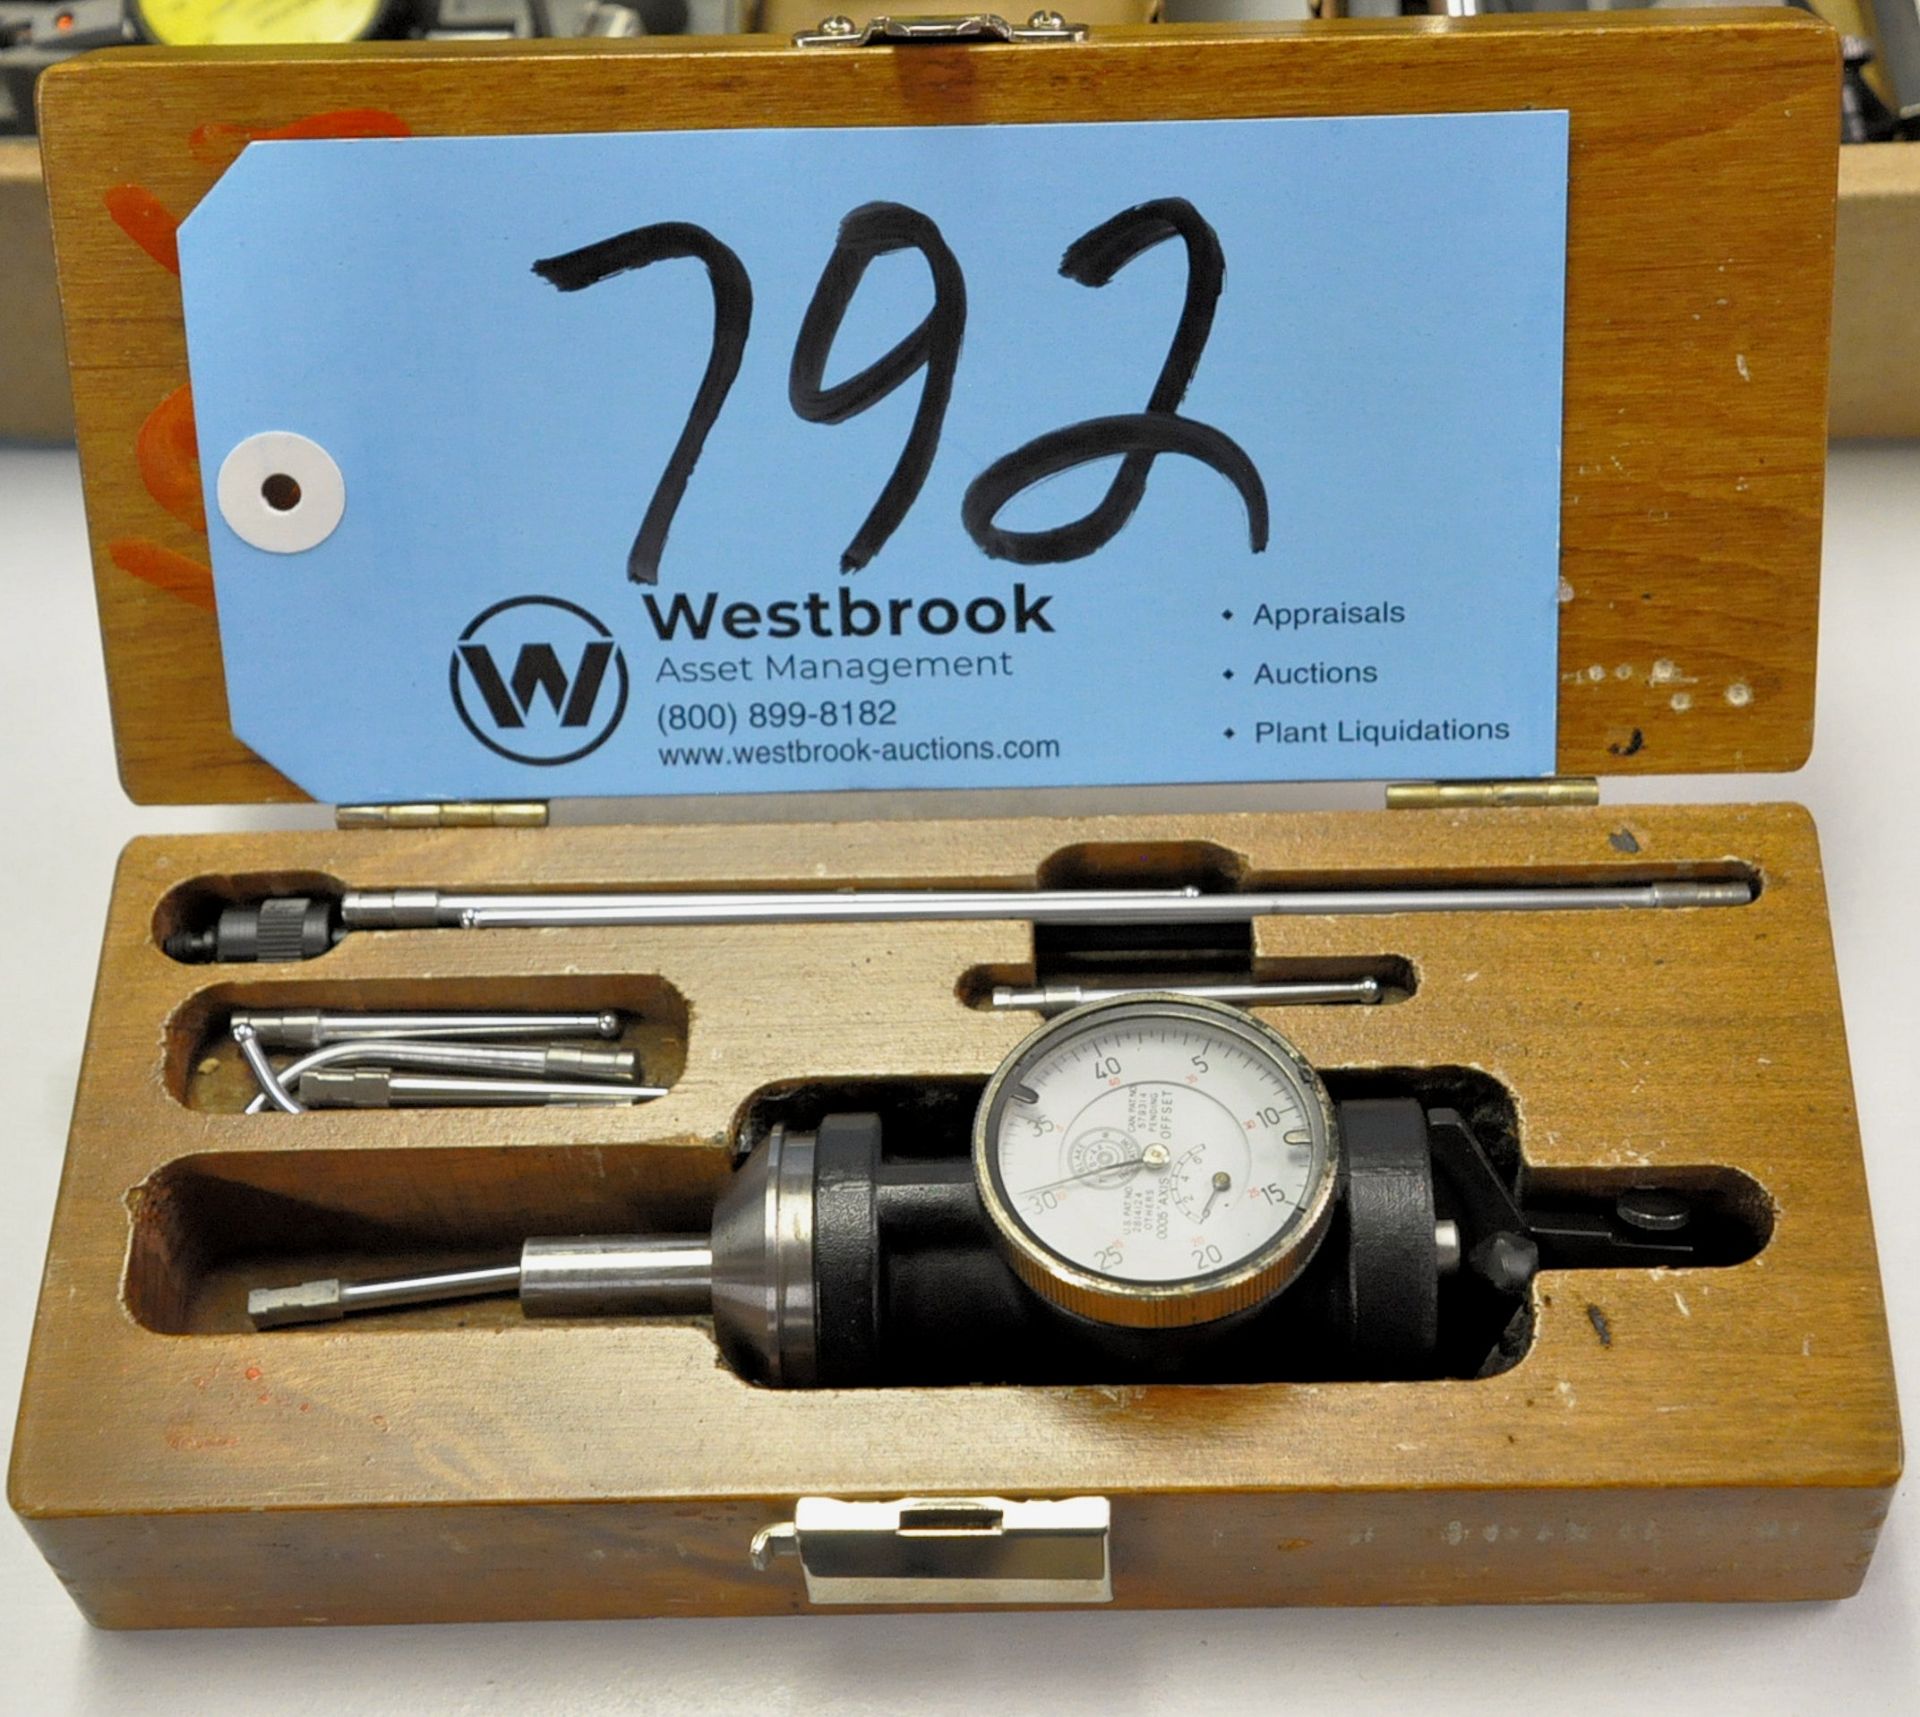 Blake CO-AX Indicator with Case